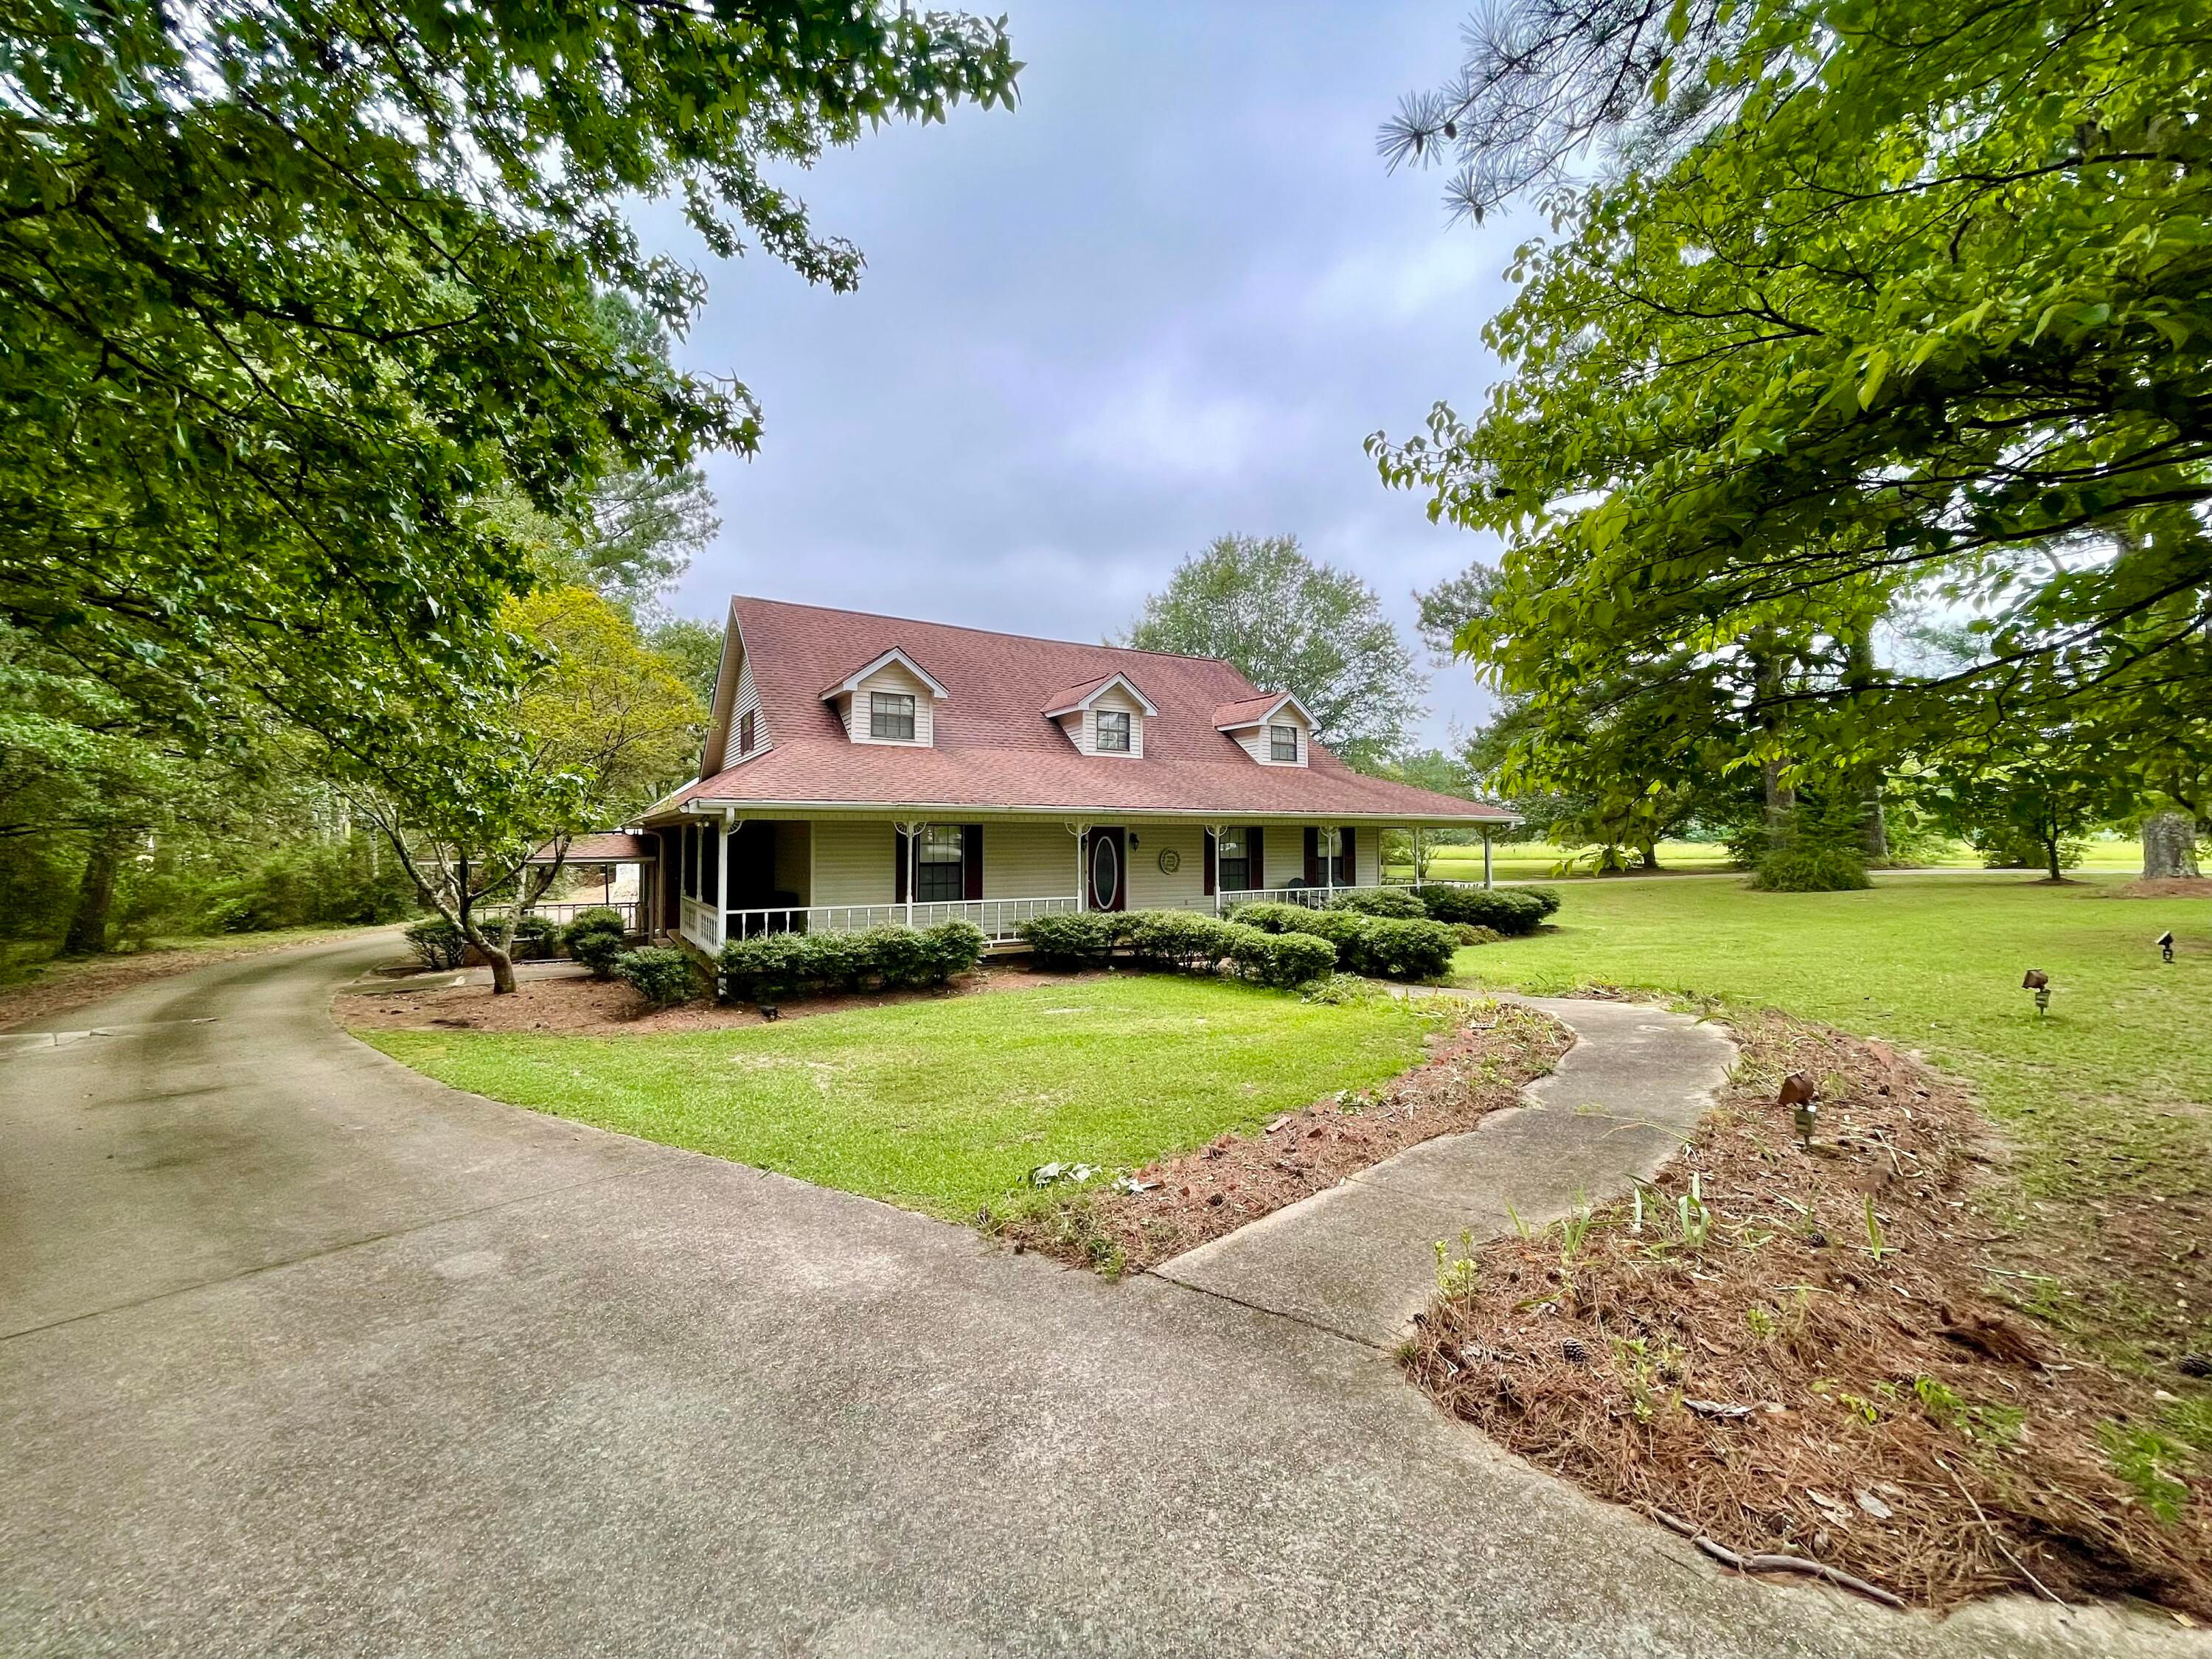 2901 E Chambers Dr., Booneville, MS 38829